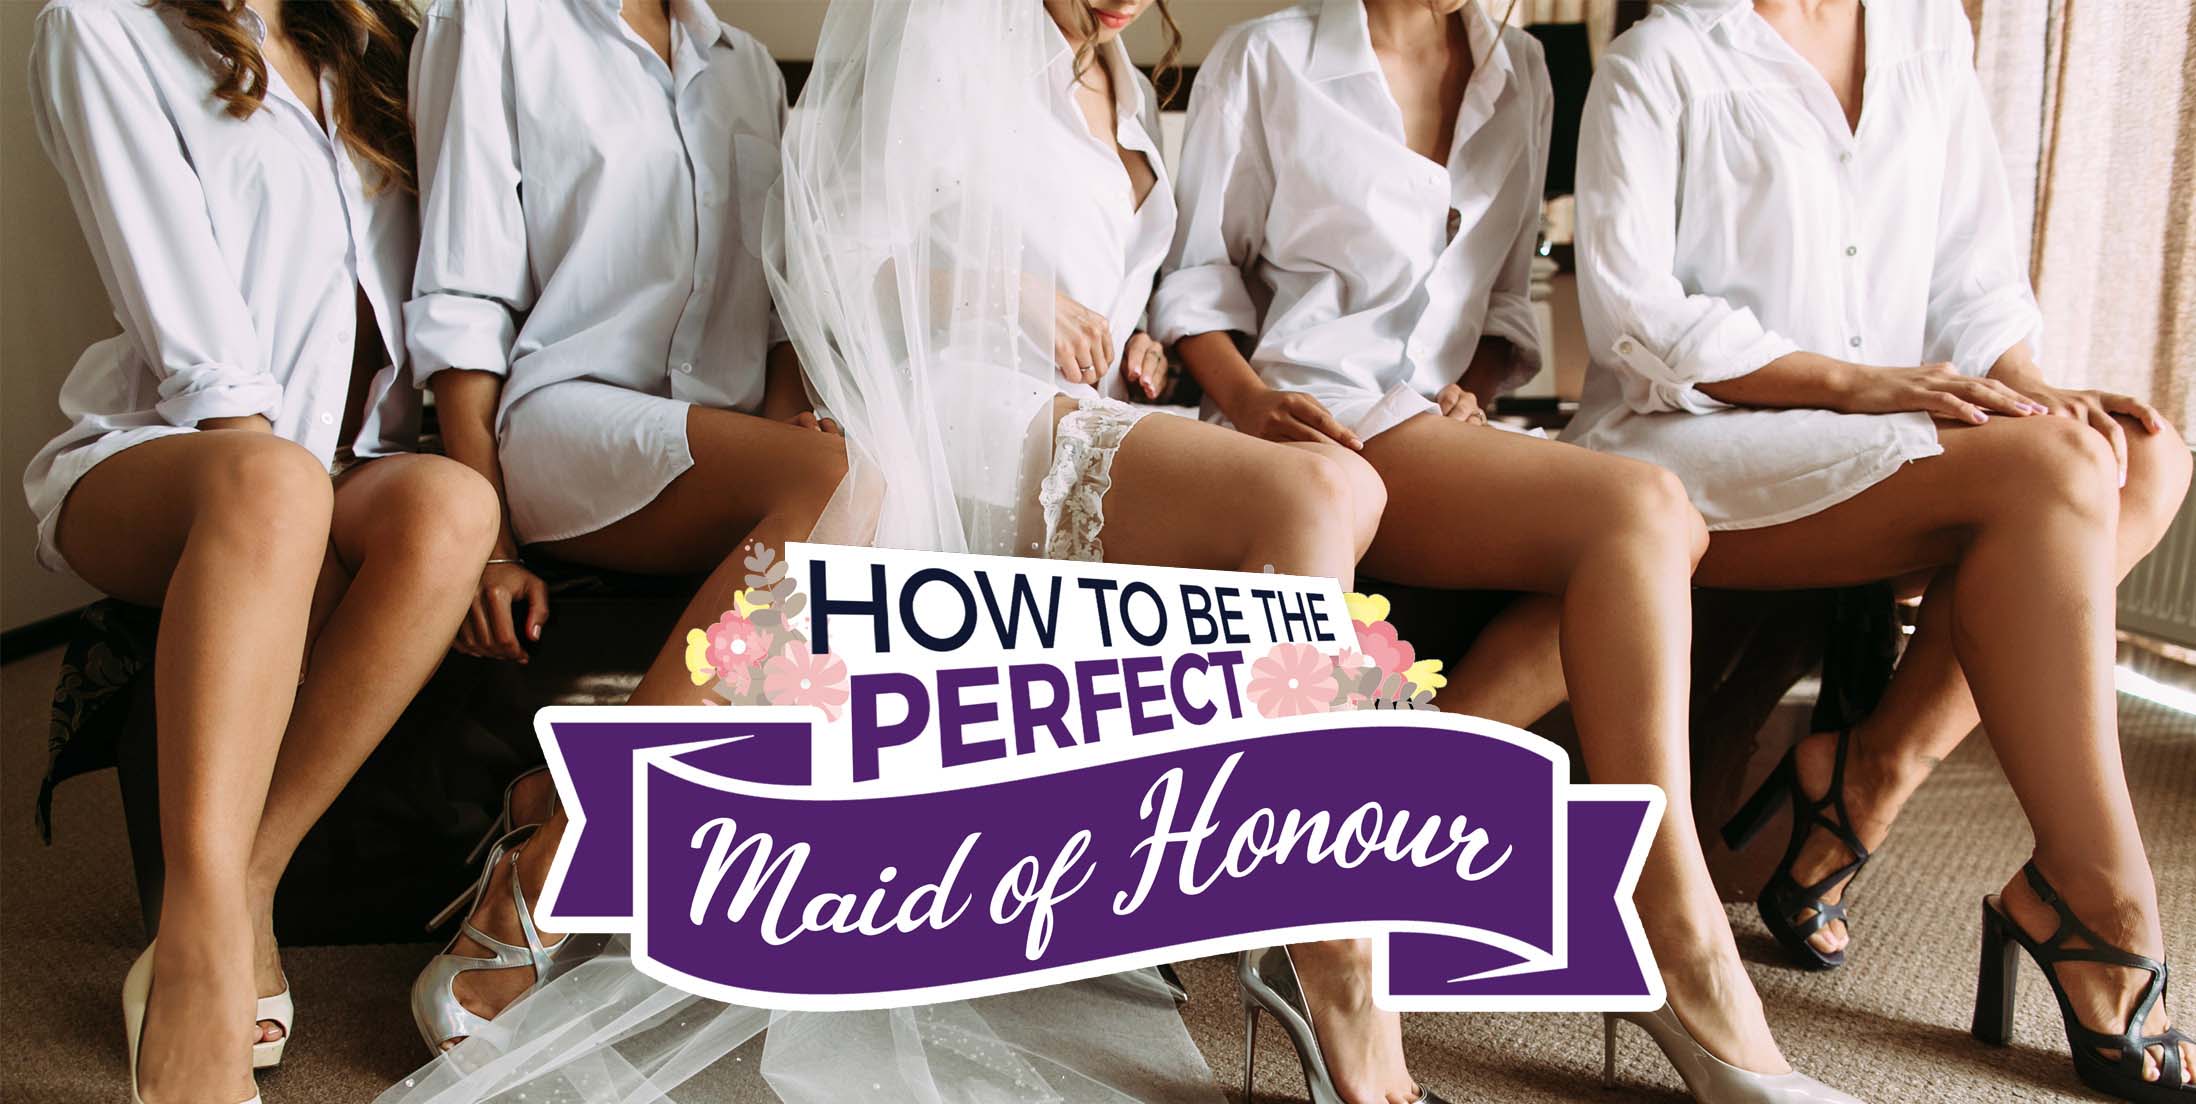 How to: Be the Perfect Maid of Honour